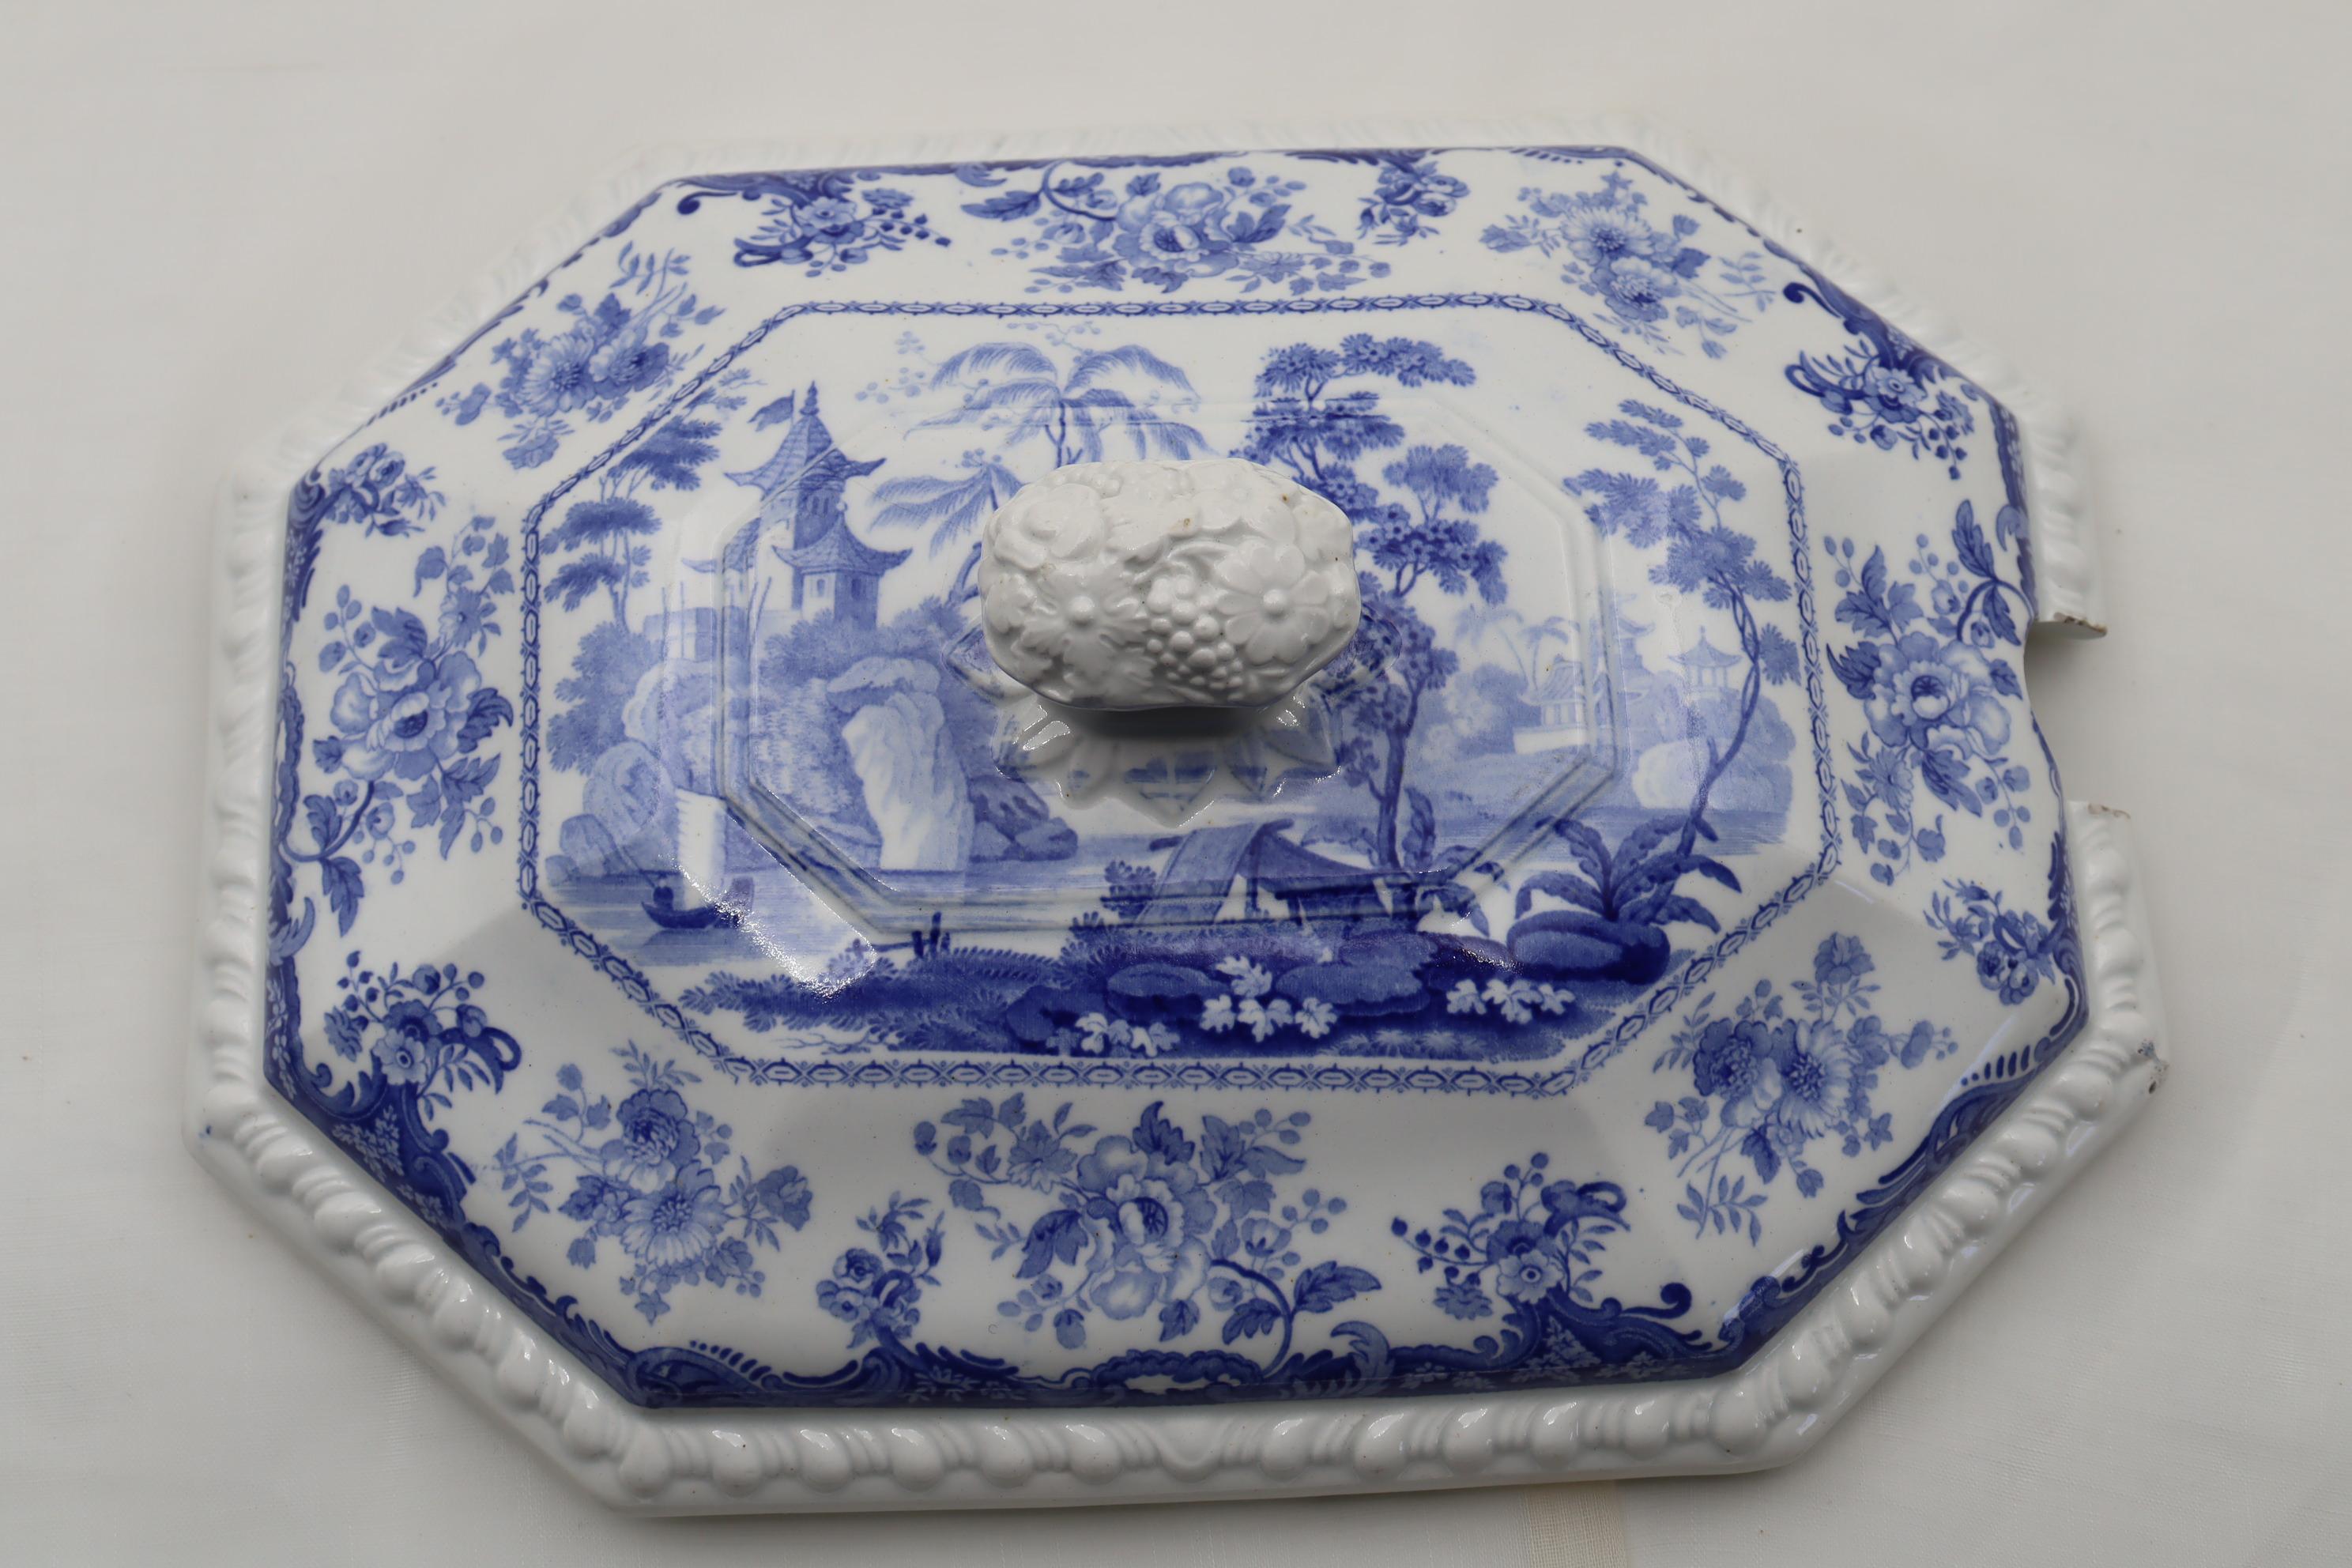 This octagonal soup tureen, under dish and ladle are decorated with Minton's 